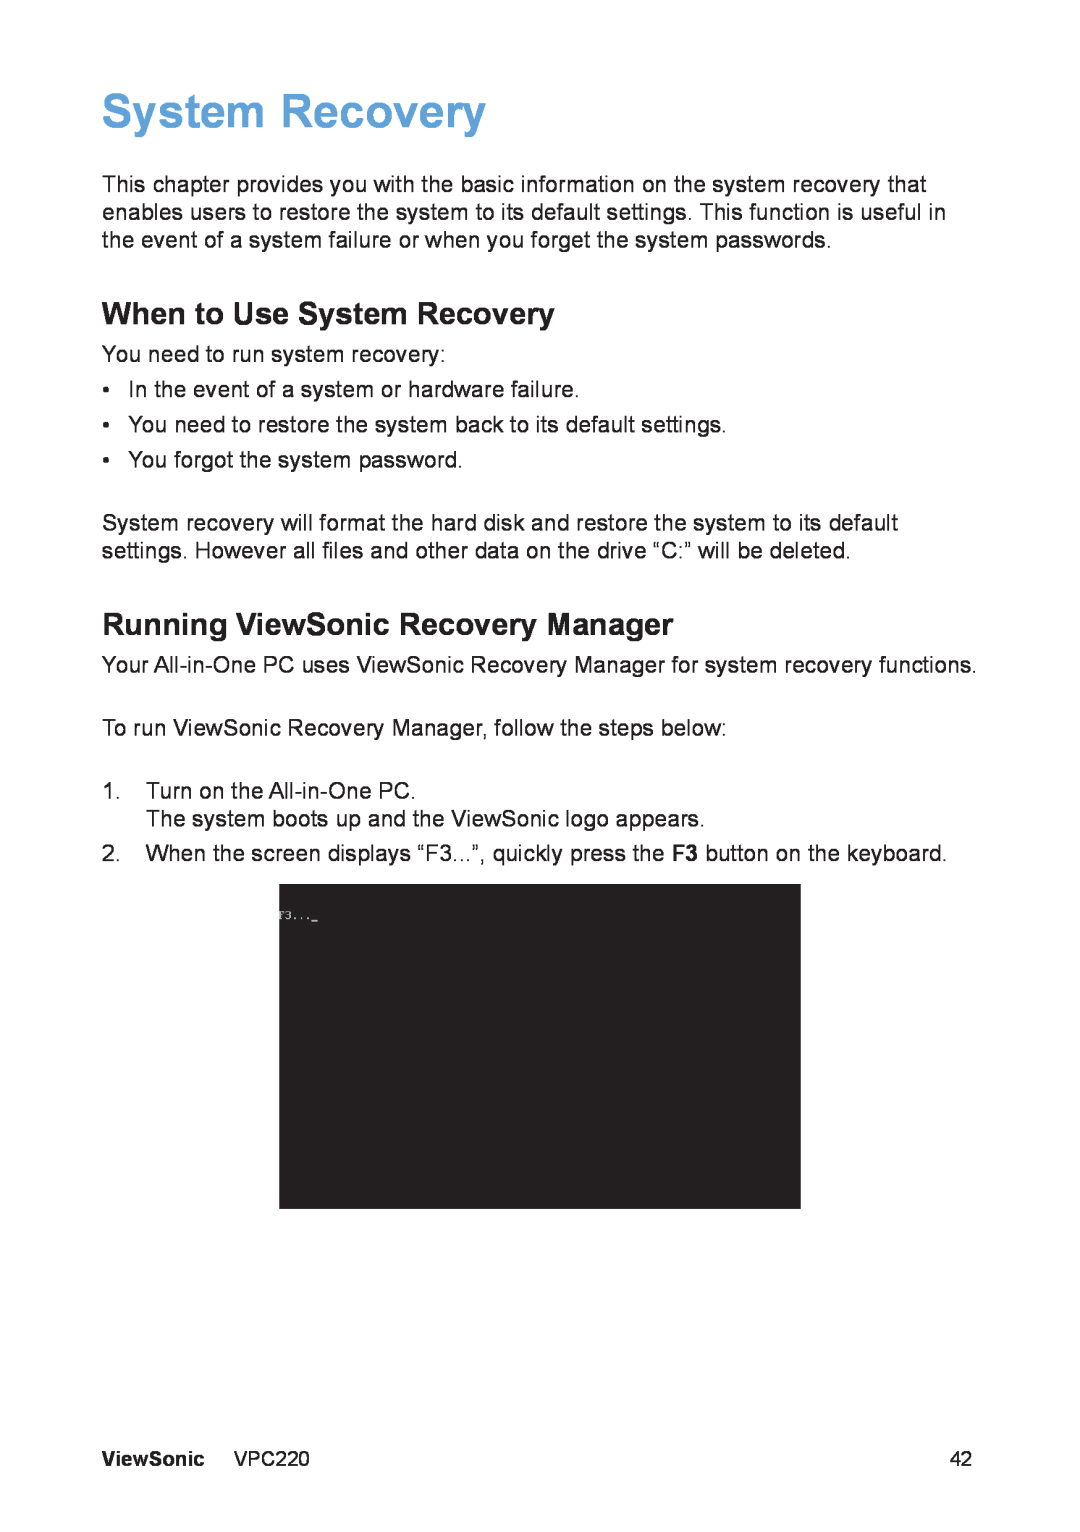 ViewSonic VS13426 manual When to Use System Recovery, Running ViewSonic Recovery Manager 